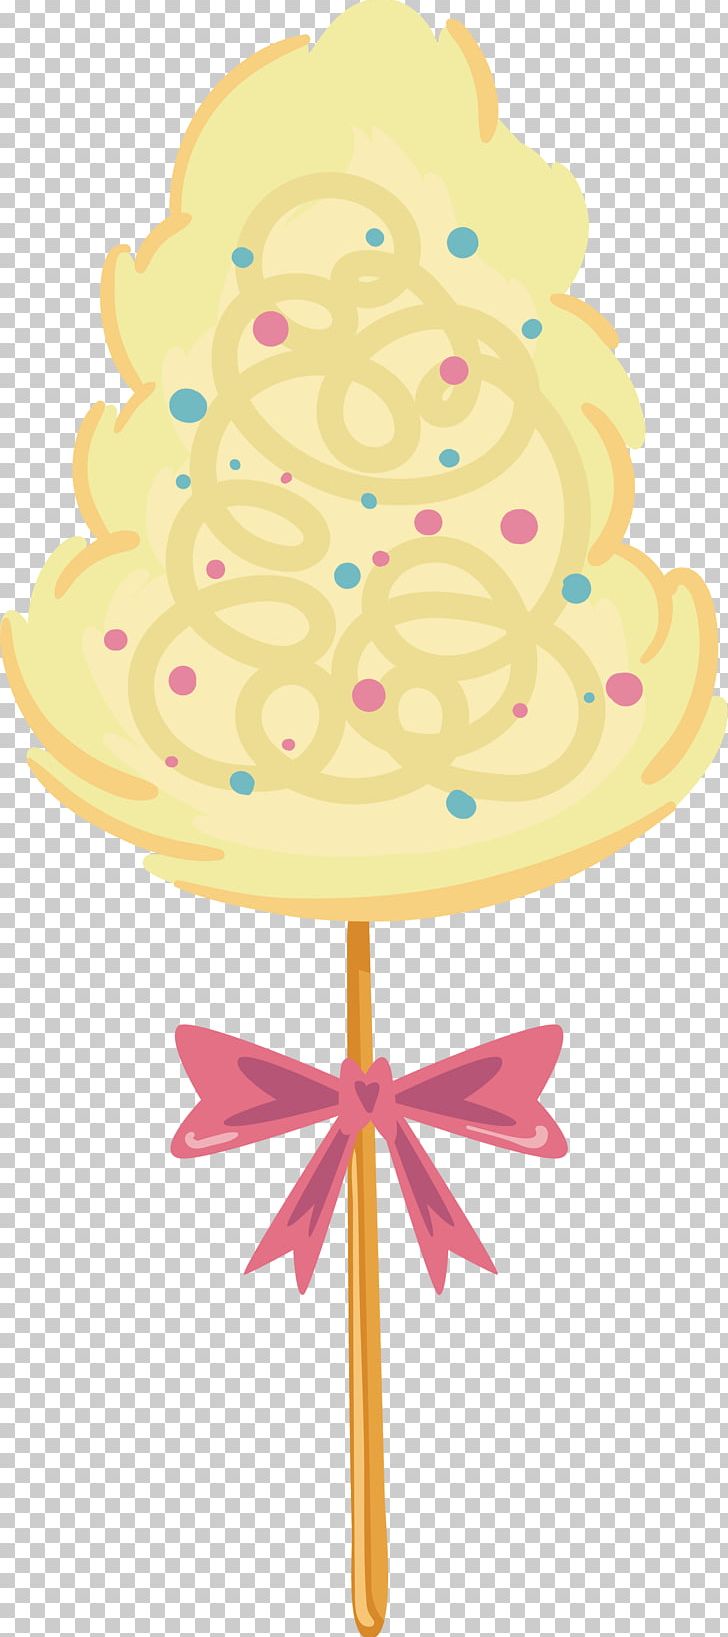 Cotton Candy Icing Sugar PNG, Clipart, Buttercream, Cake, Cake Decorating, Candy Cane, Candy Vector Free PNG Download